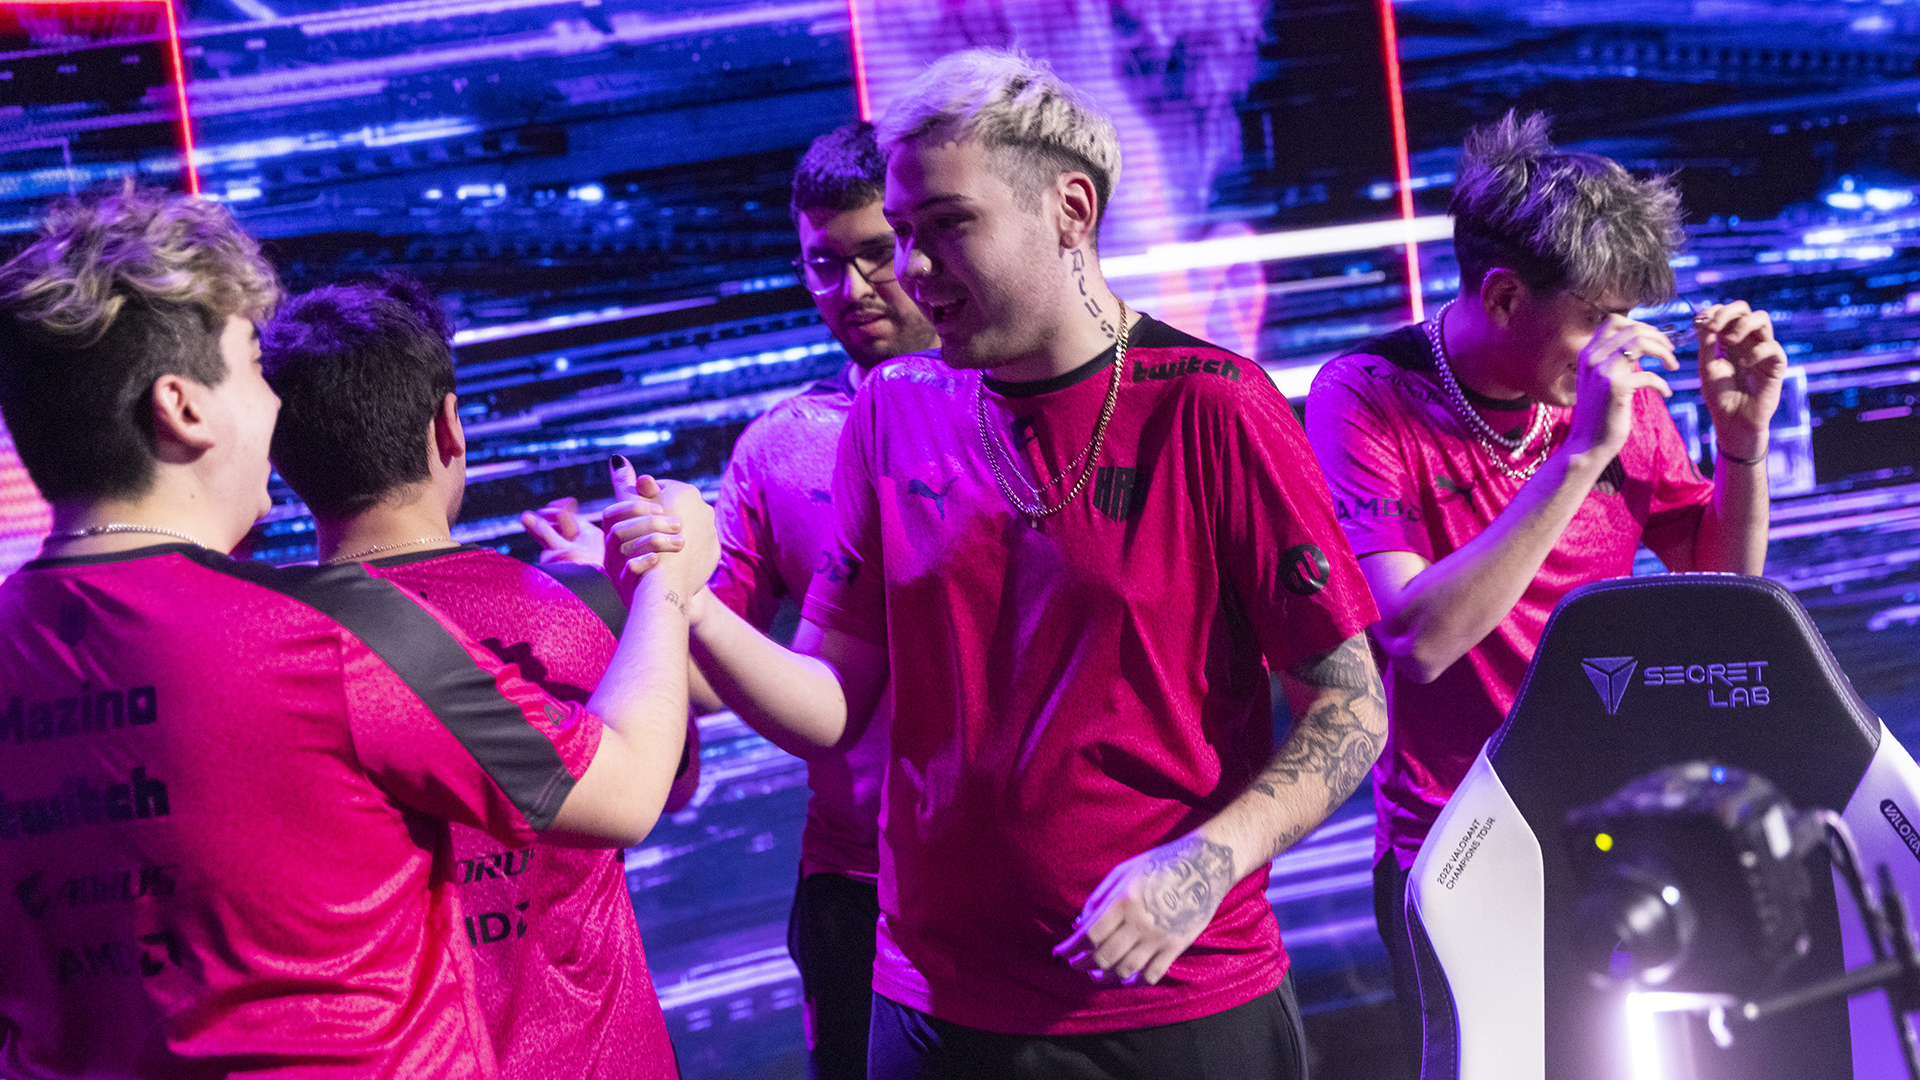 COPENHAGEN, DENMARK - JULY 10: KRU Esports reacts after a victory match at the VALORANT Champions Tour: Stage 2 Masters Group Stage on July 10, 2022 in Copenhagen, Denmark. (Photo by Colin Young-Wolff/Riot Games)